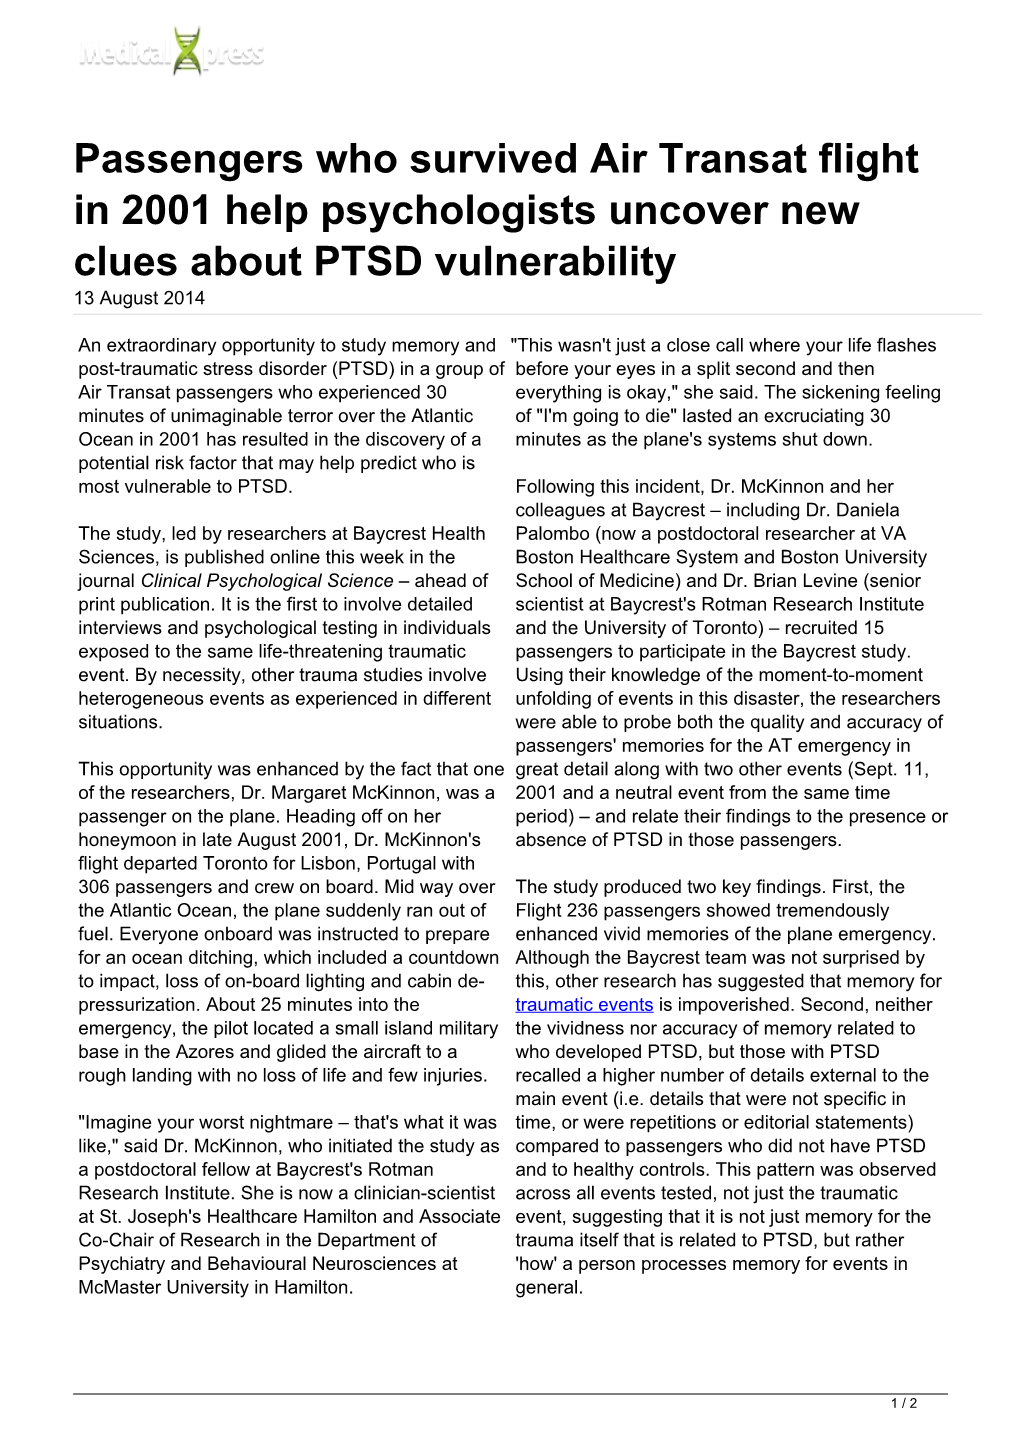 Passengers Who Survived Air Transat Flight in 2001 Help Psychologists Uncover New Clues About PTSD Vulnerability 13 August 2014